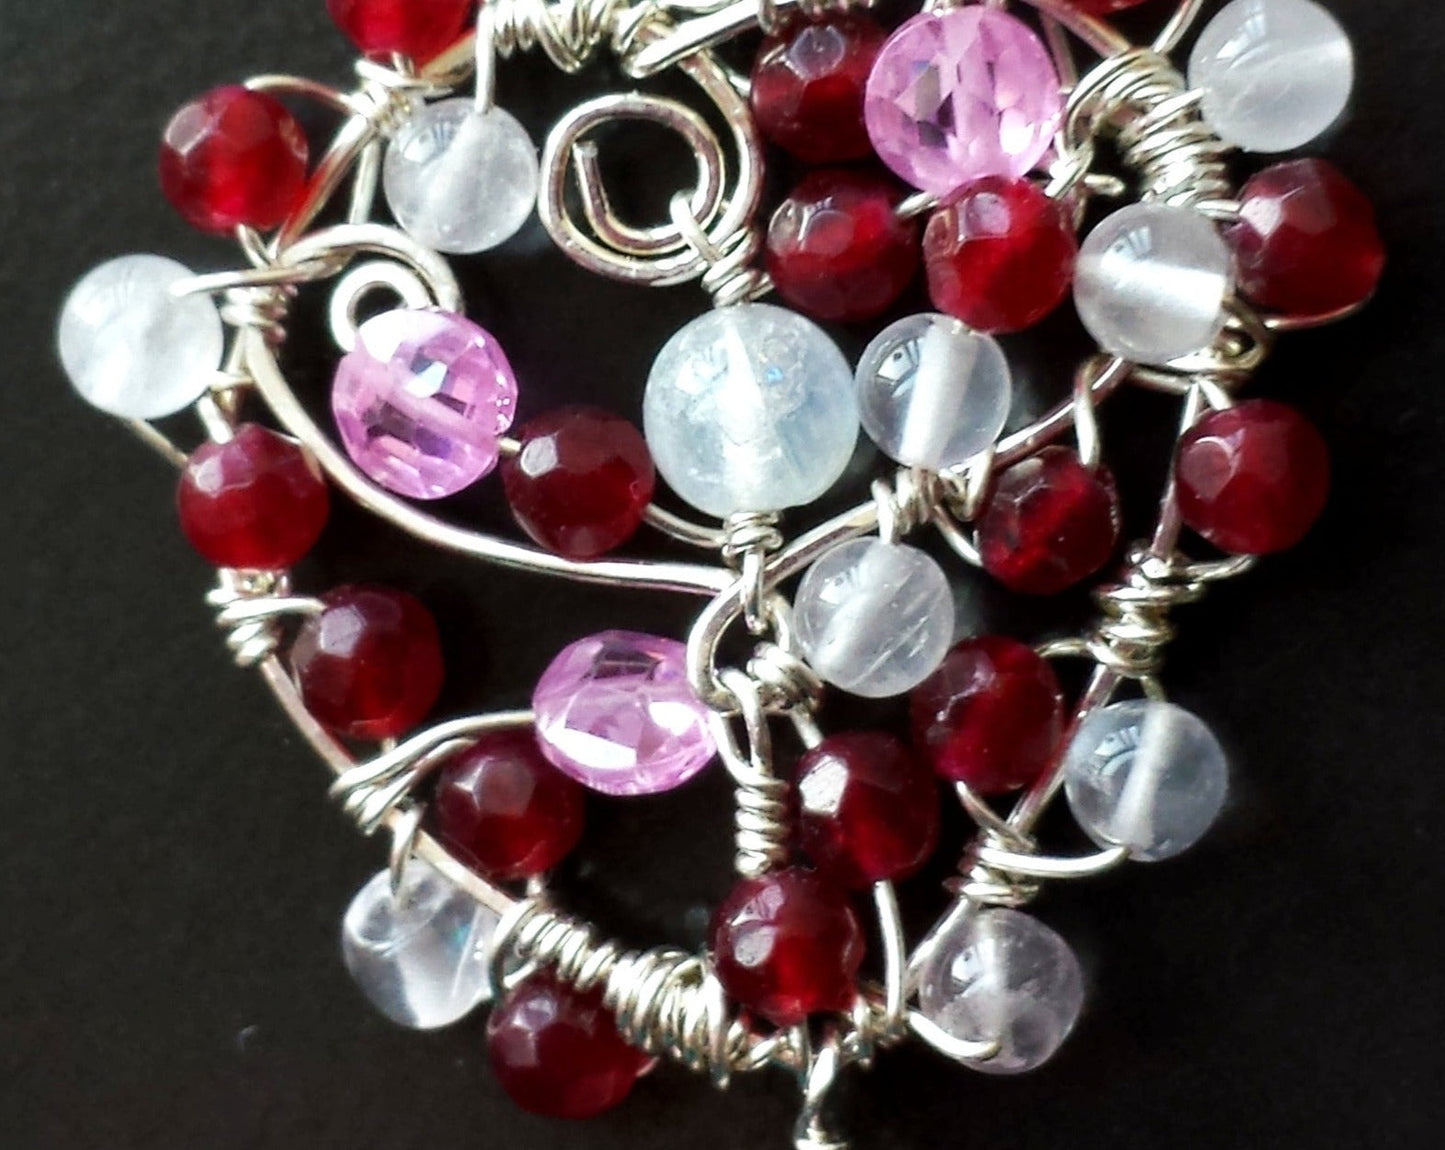 Heart of Gems Pendant Necklace, One of a Kind, Sterling Silver Mulit Gemstone Wire Work Pendant, Reds & Pinks, Moonstone, Jade